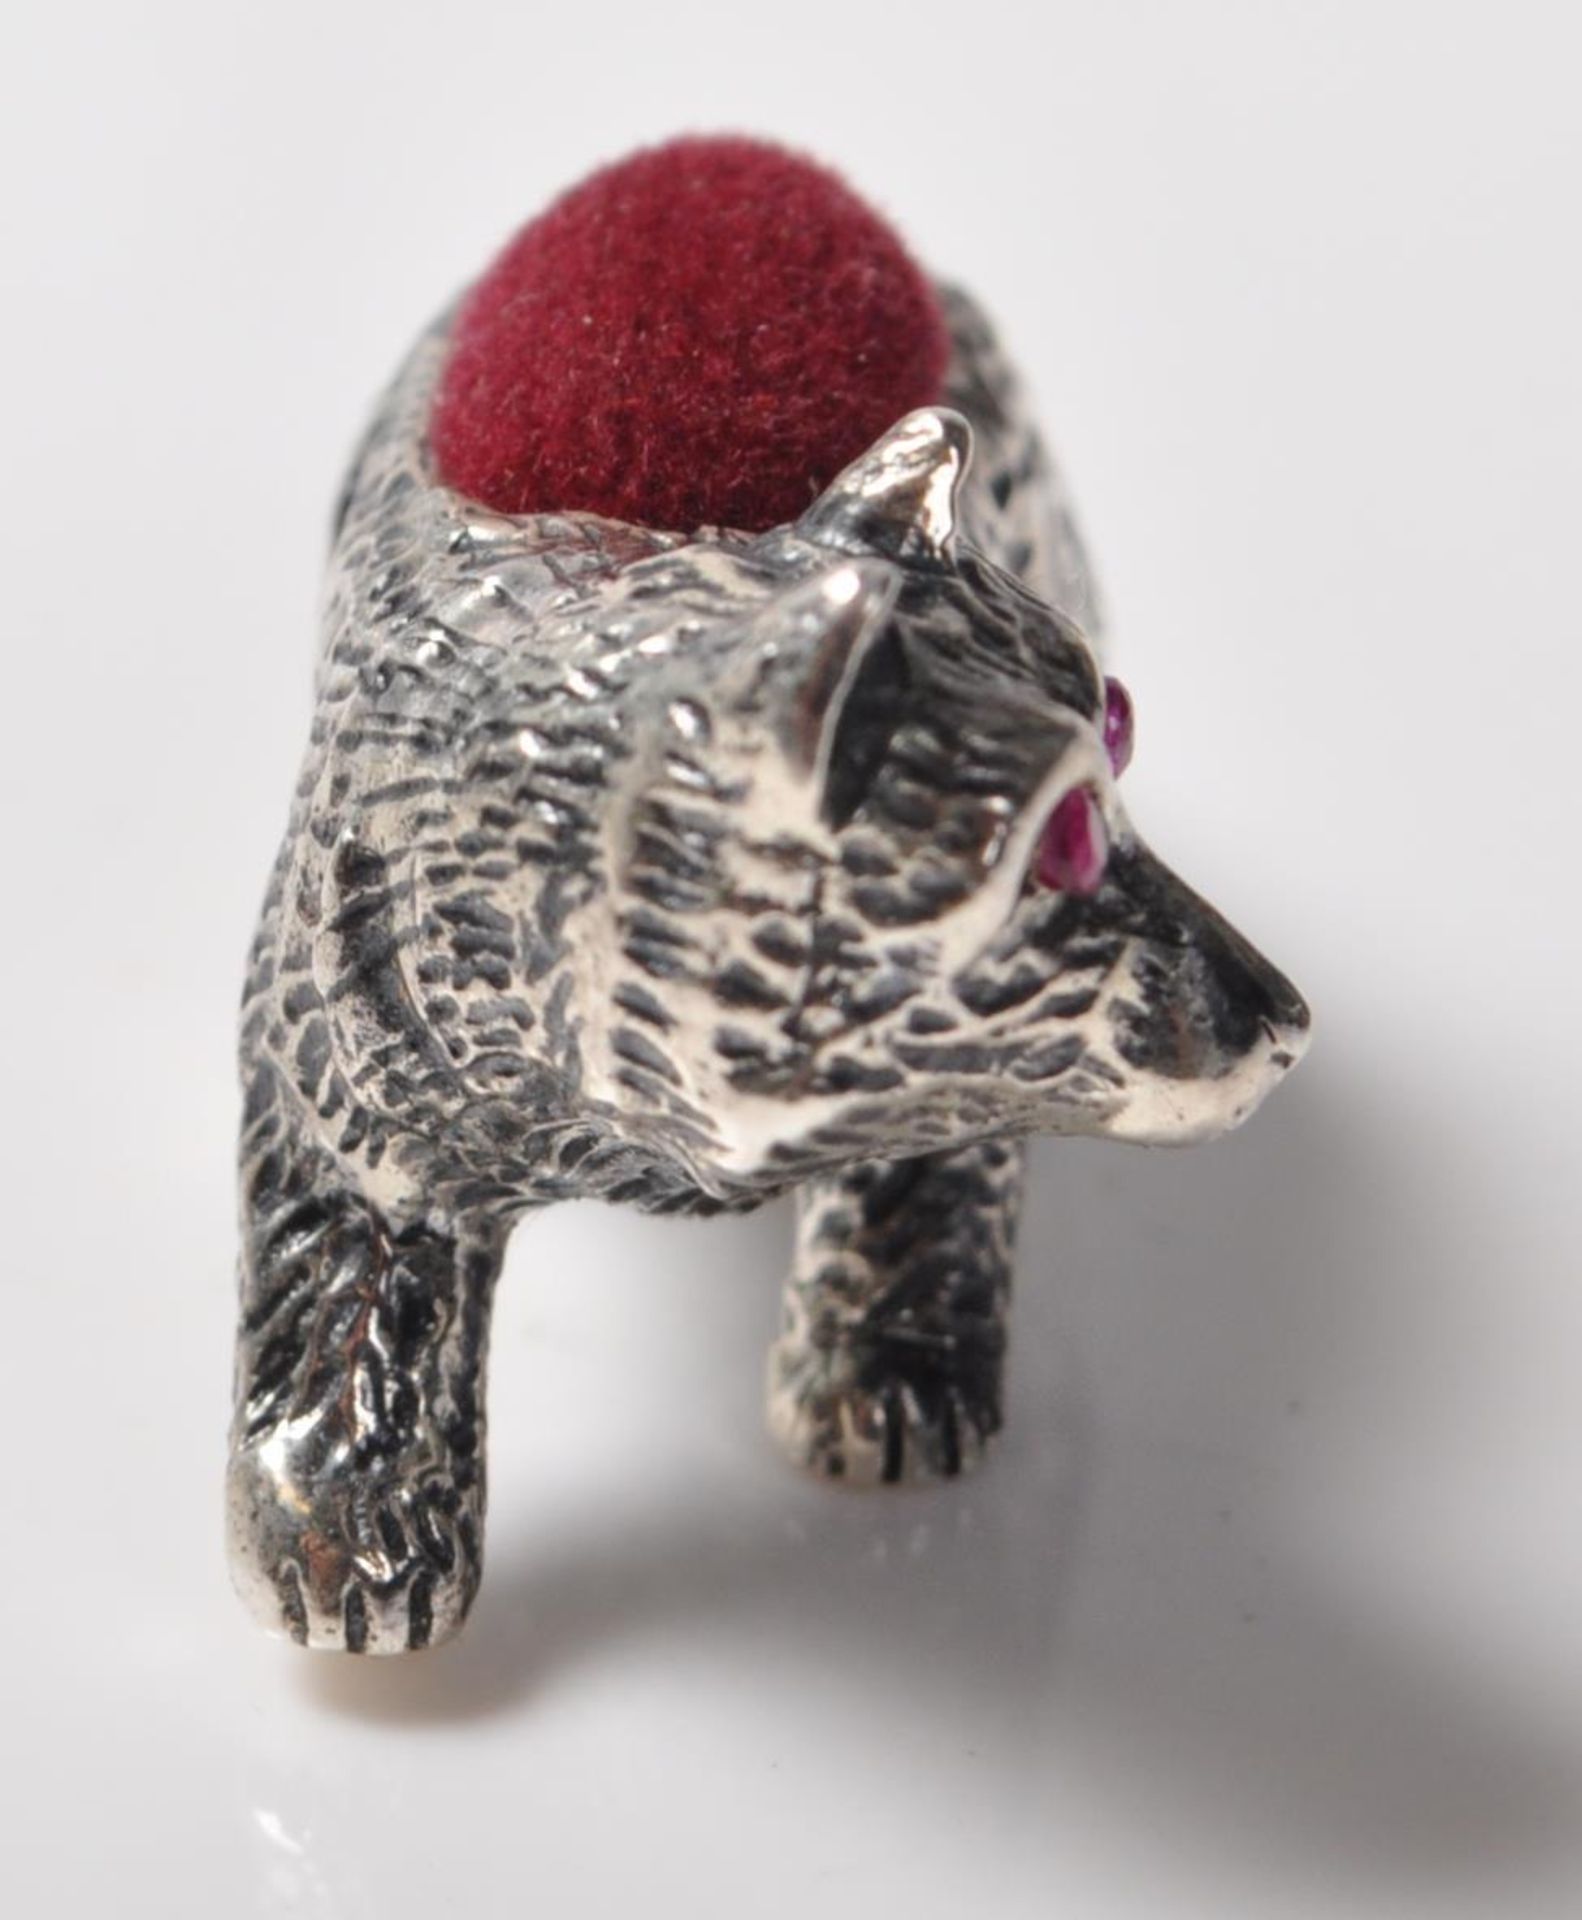 STAMPED STERLING SILVER PINCUSHION IN THE FORM OF A FOX - Image 5 of 6